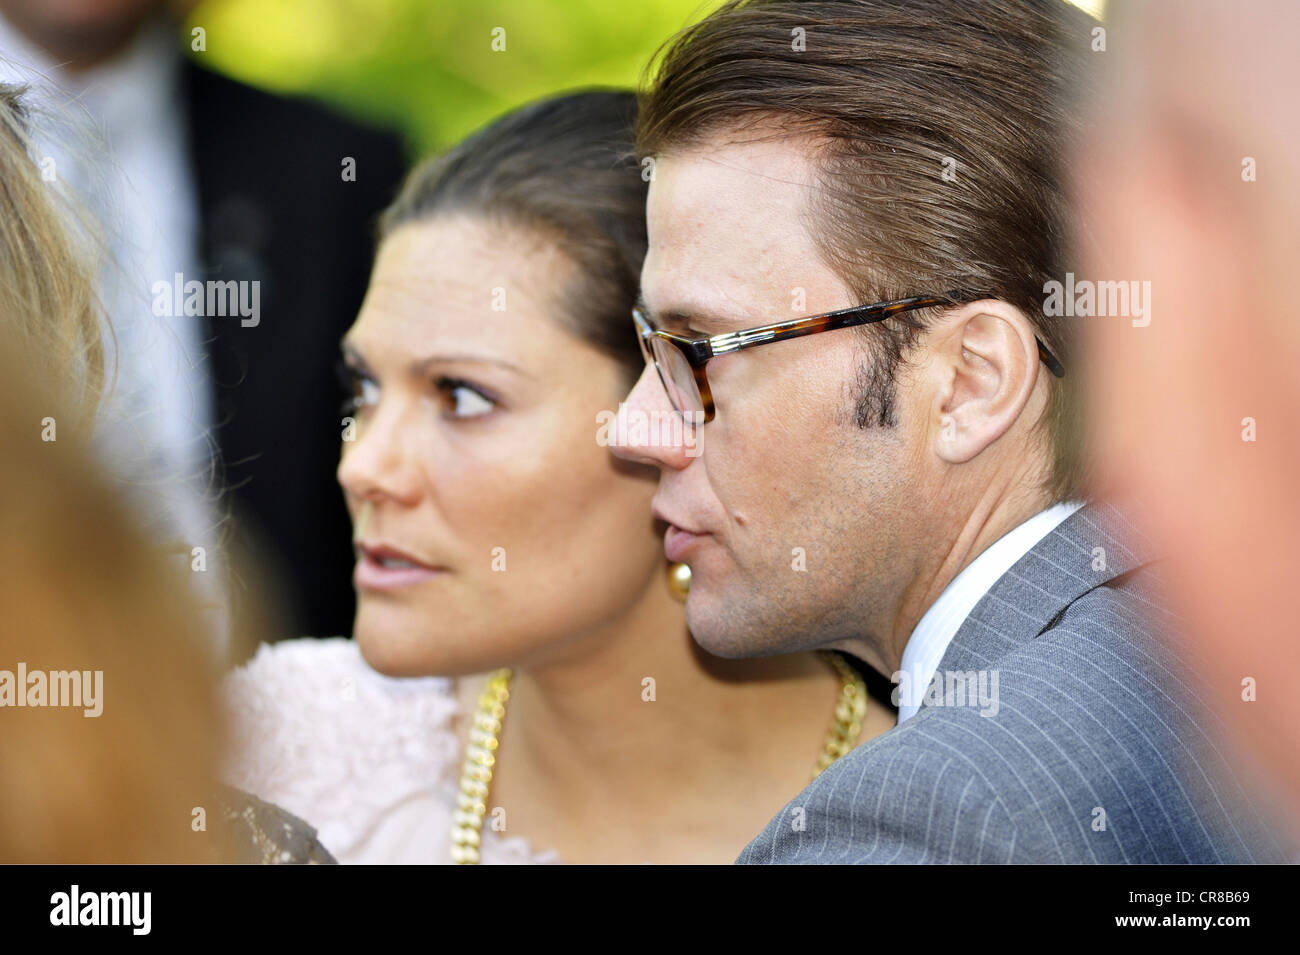 Victoria, * 14.7.1977, Crown Princess of Sweden since 1.1.1980, half length, with prince Daniel, during a visit of the international youth library at Blutenburg Castle, Munich, Germany, 25.5.2011, Stock Photo